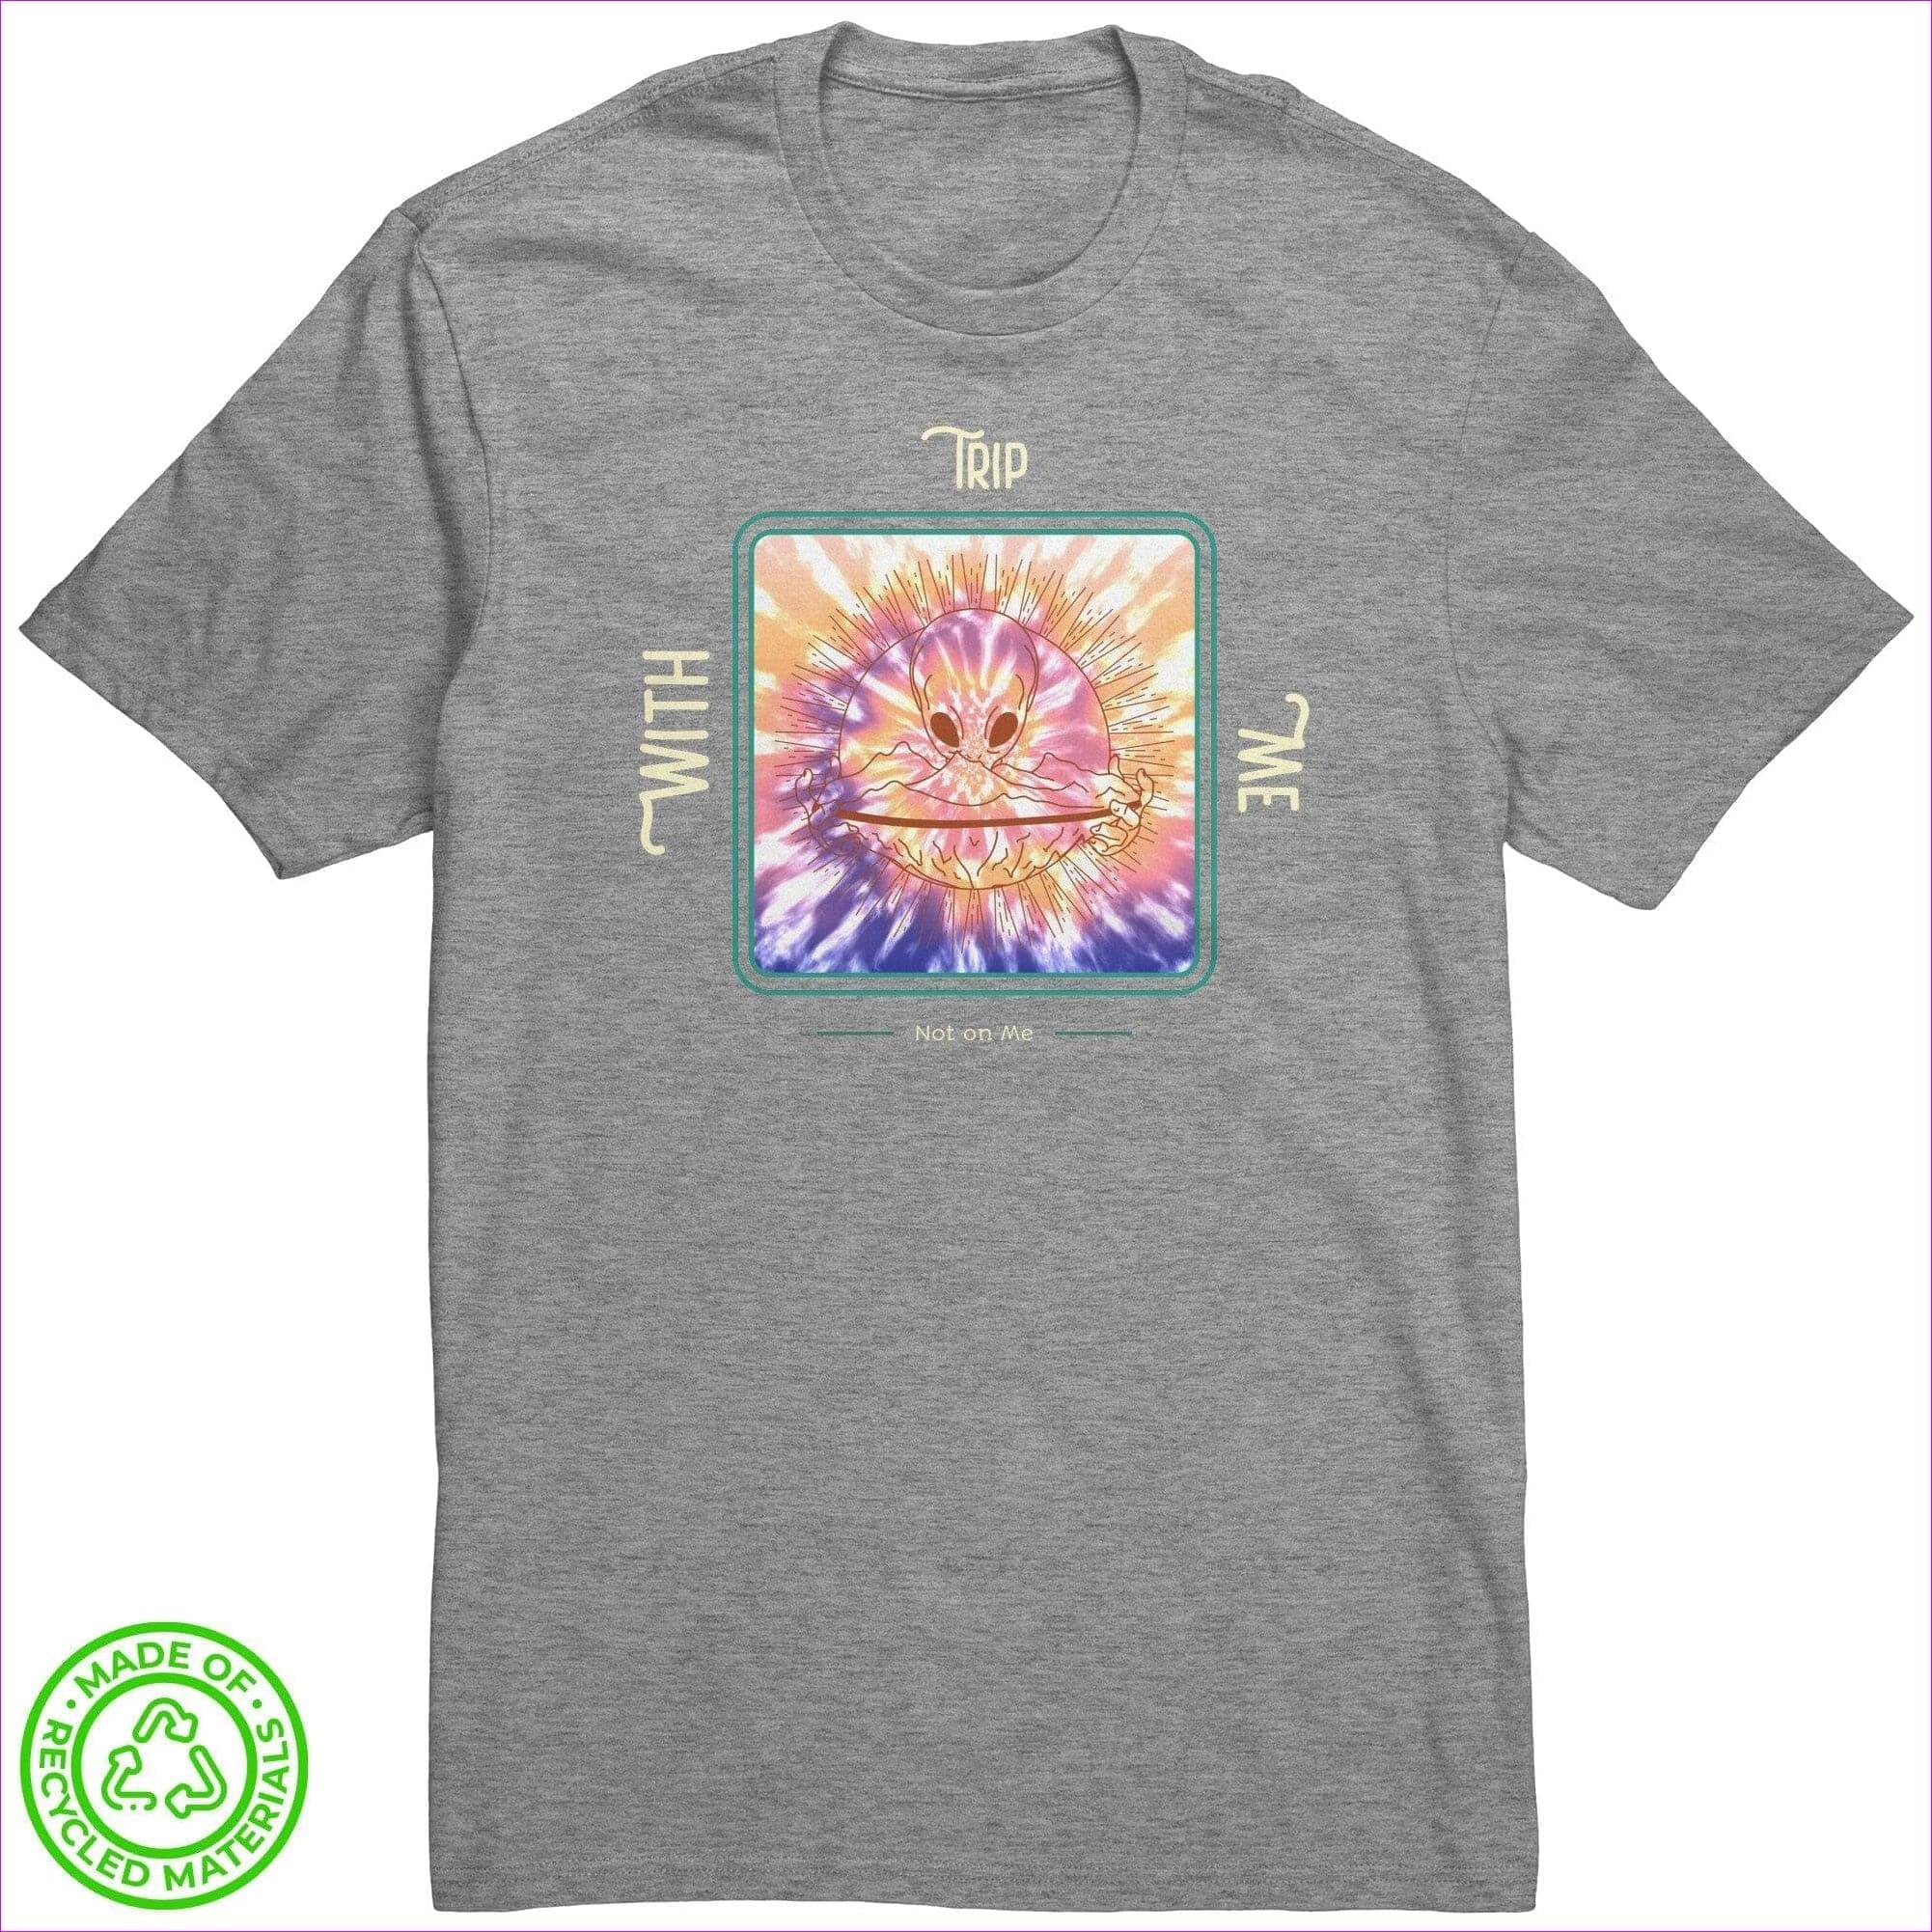 Light Heather Grey - Trip with Me Not On Me Recycled Fabric Unisex Tee - Unisex T-Shirt at TFC&H Co.